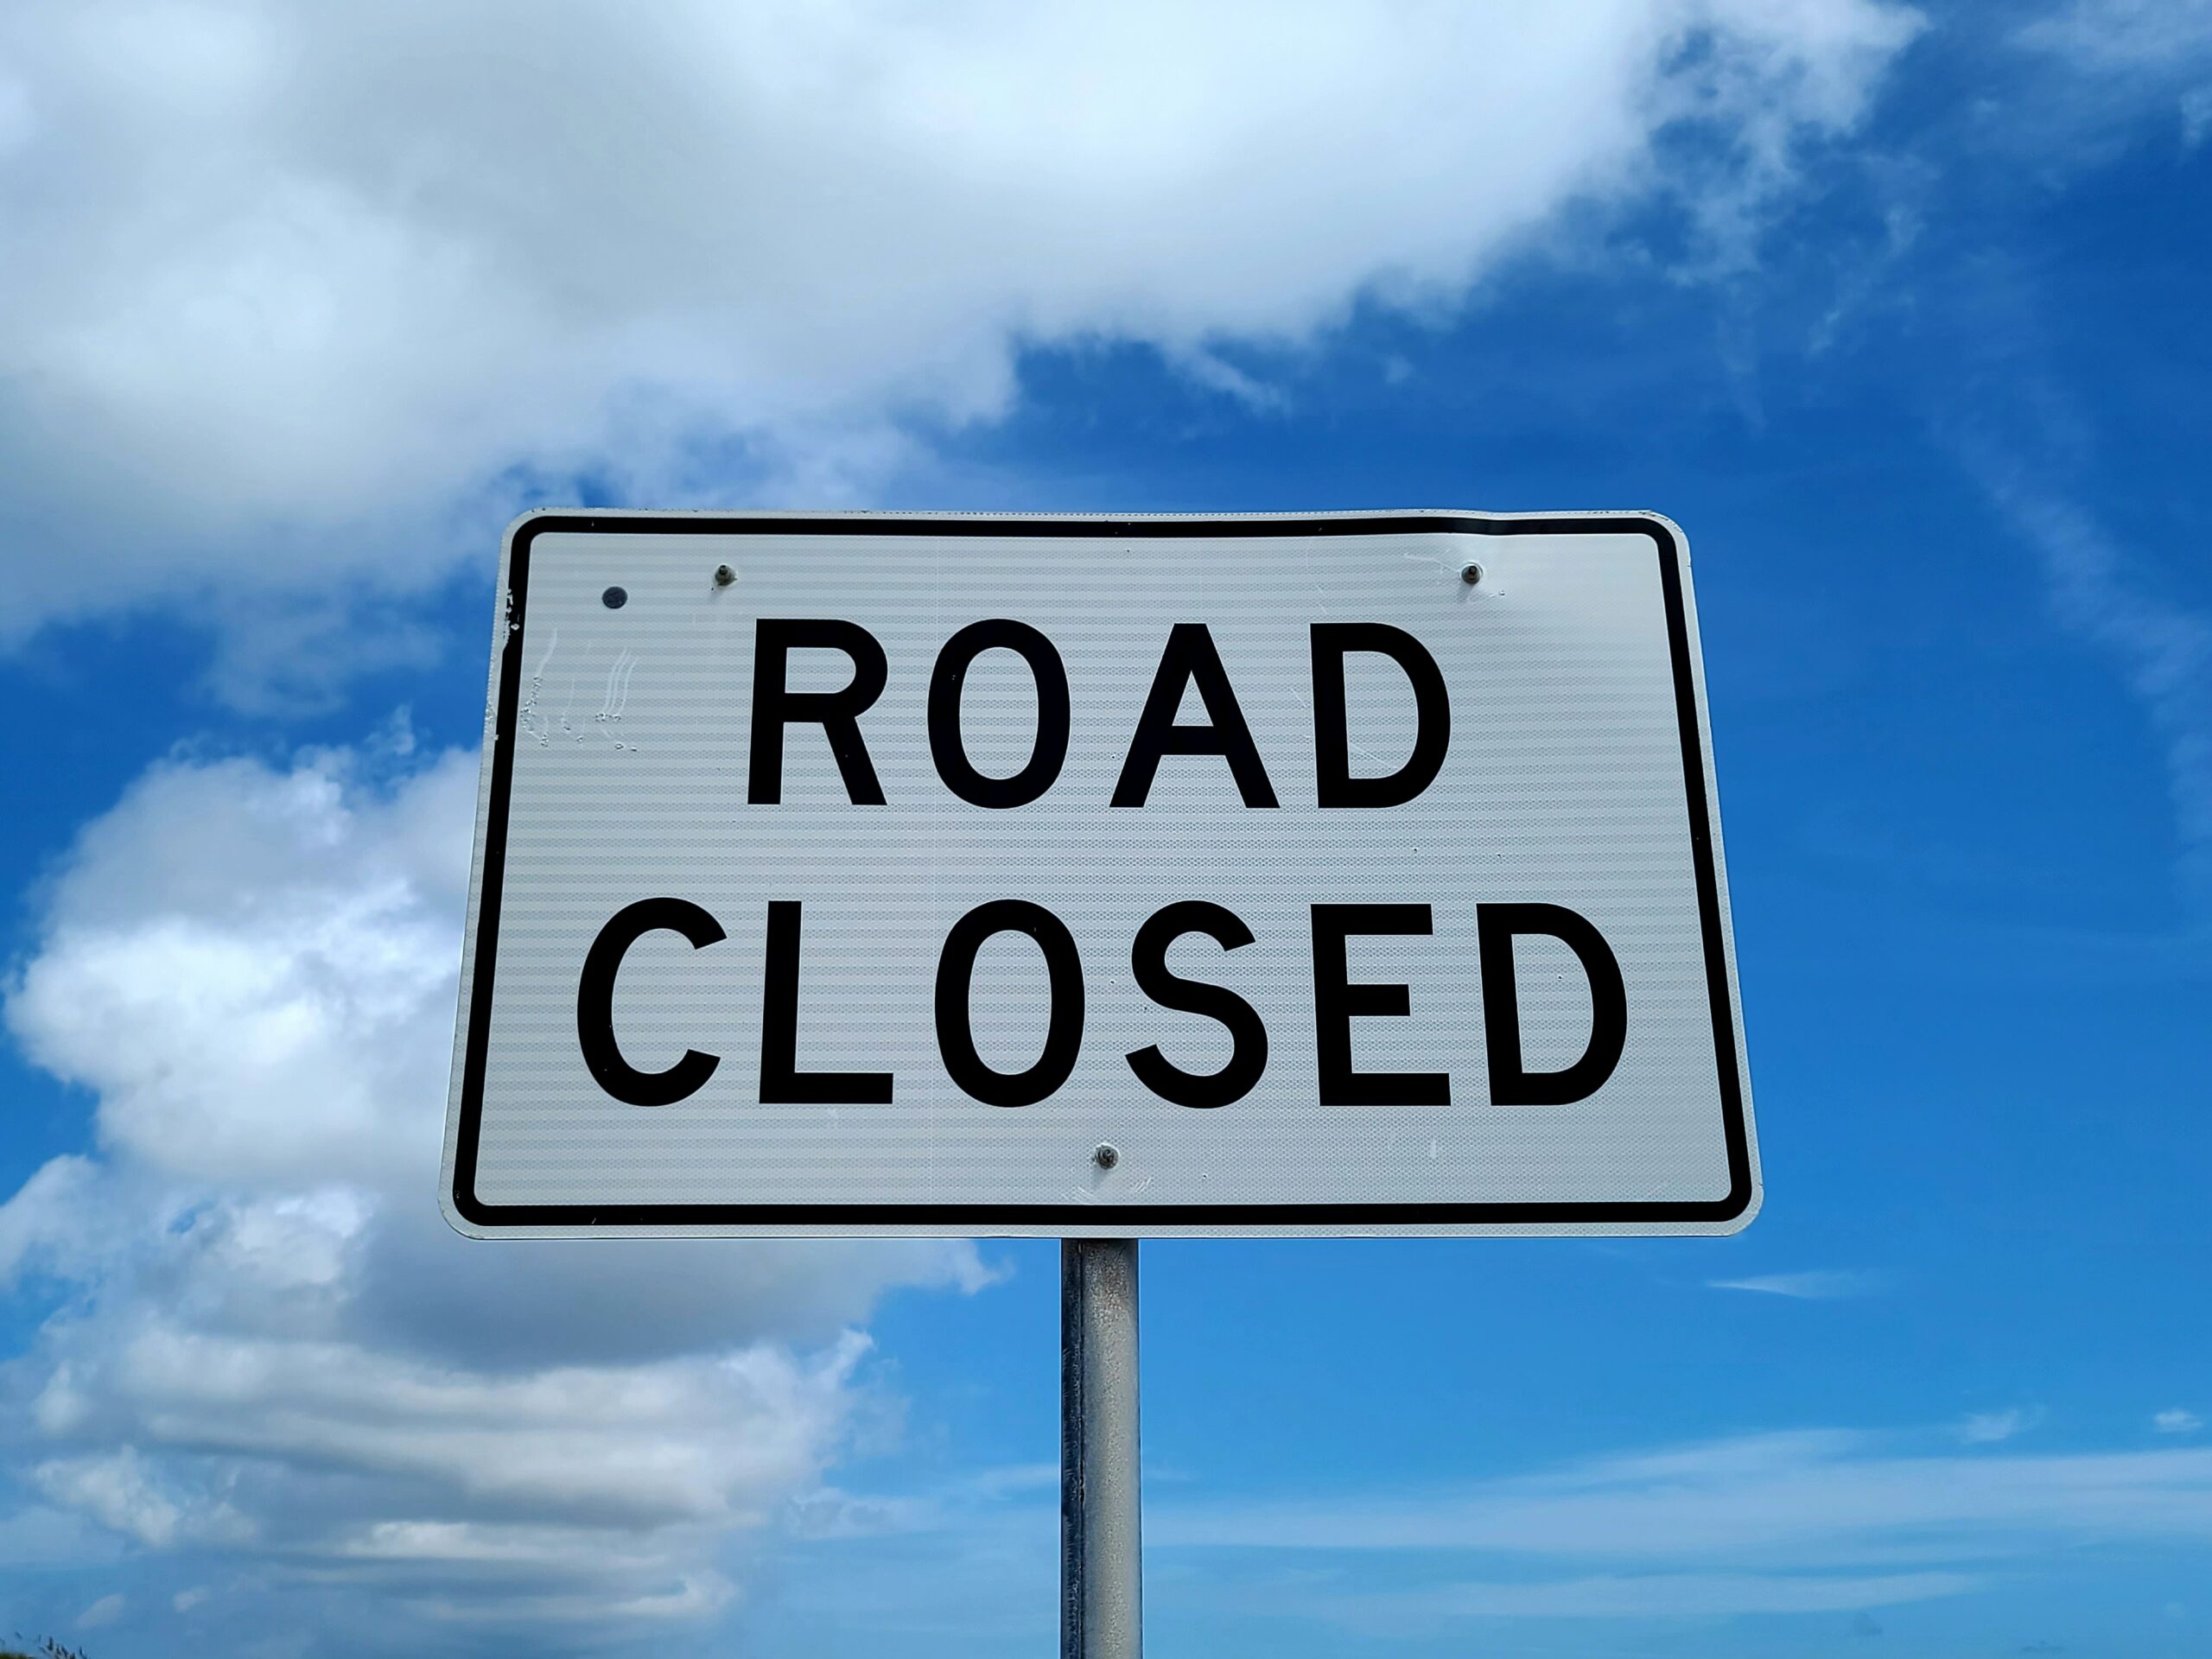 Some of Route 9 will be closed fro Friday, Jan. 6 through Monday, March 20. (Unsplash)